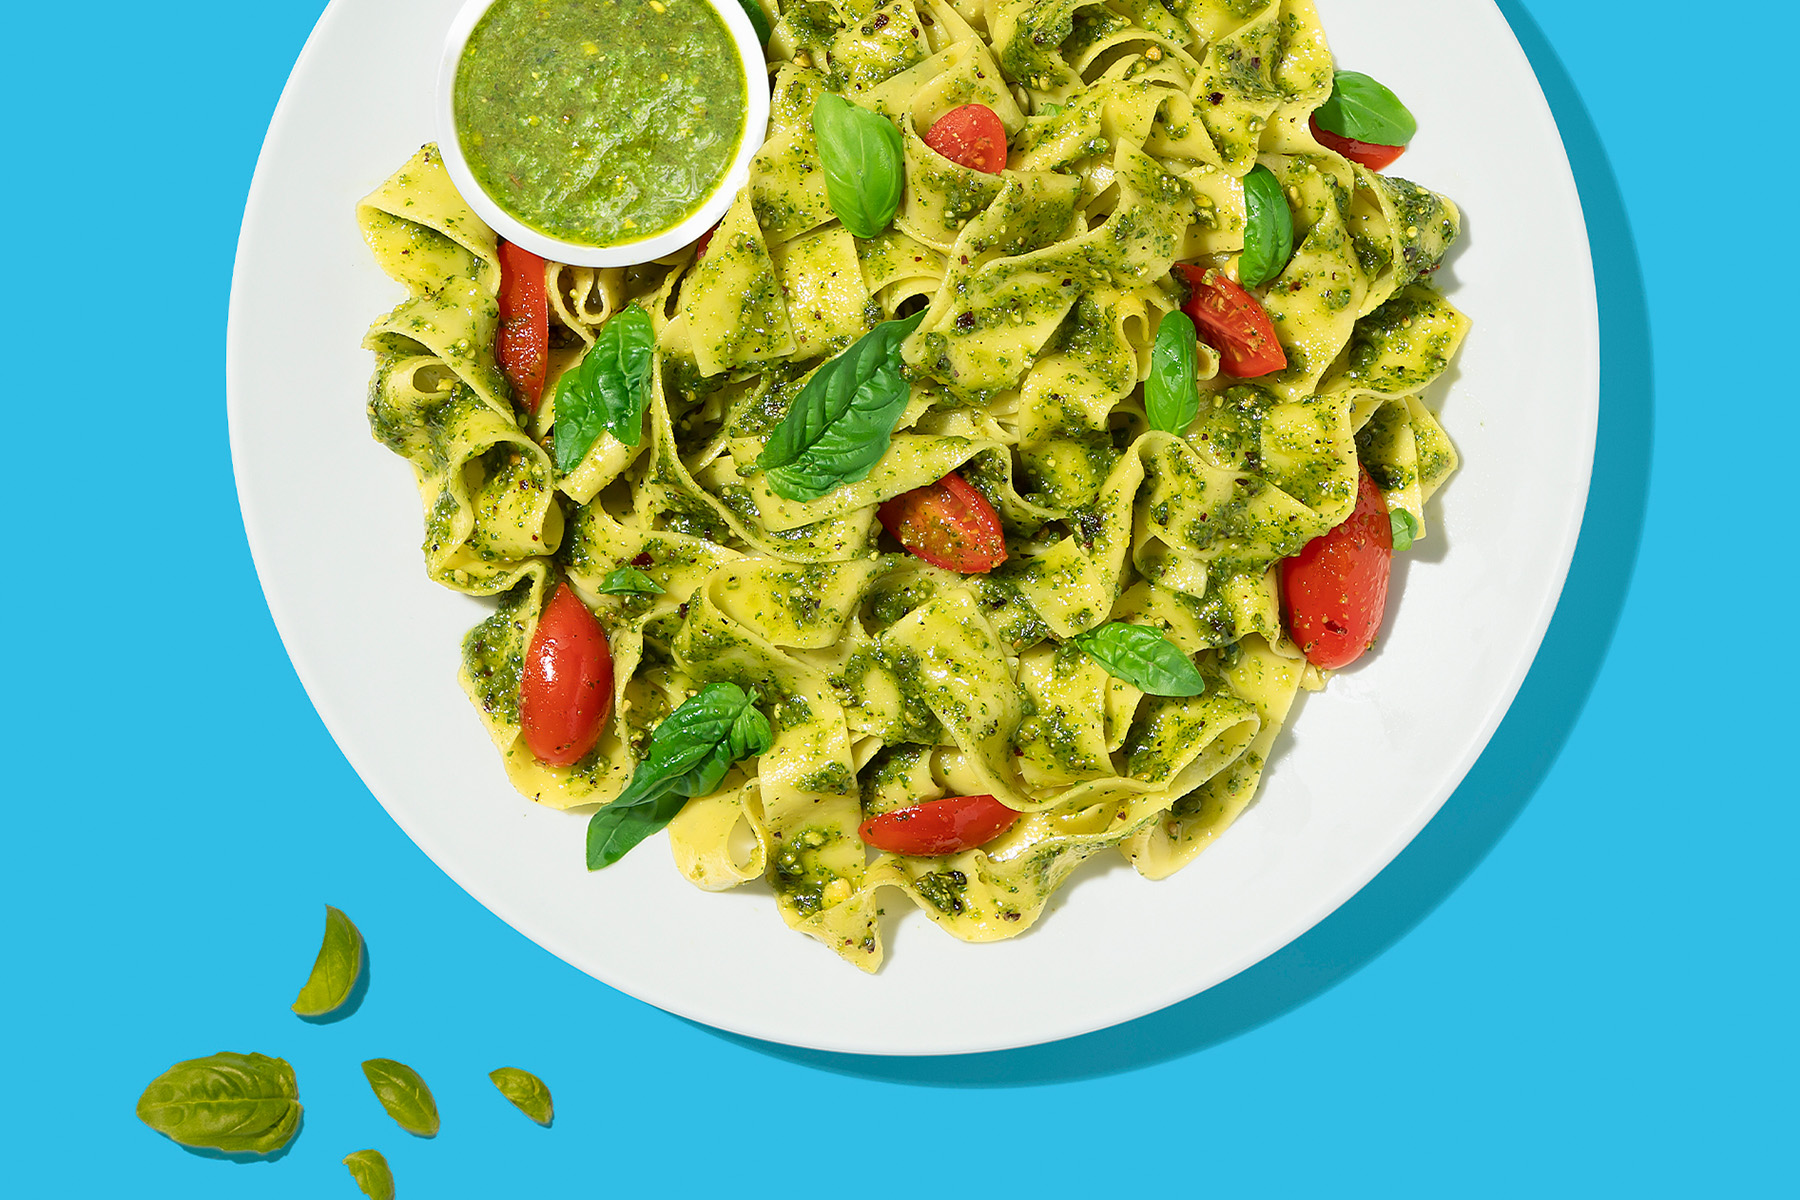 plate of pasta with arugula pesto and cherry tomatoes